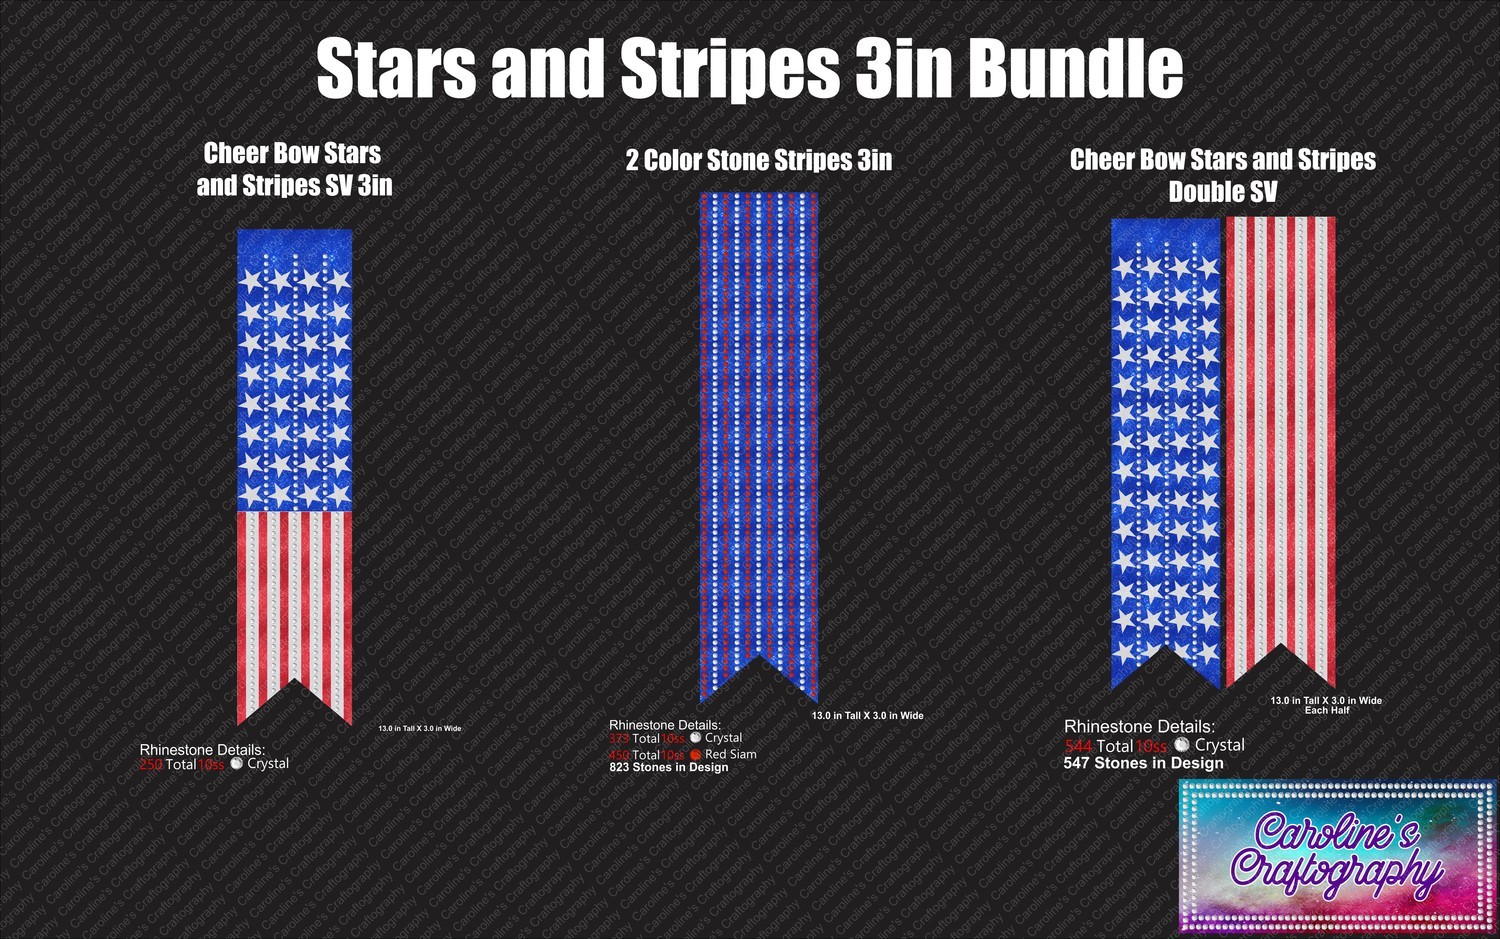 Cheer Bow Stars and Stripes Bundle